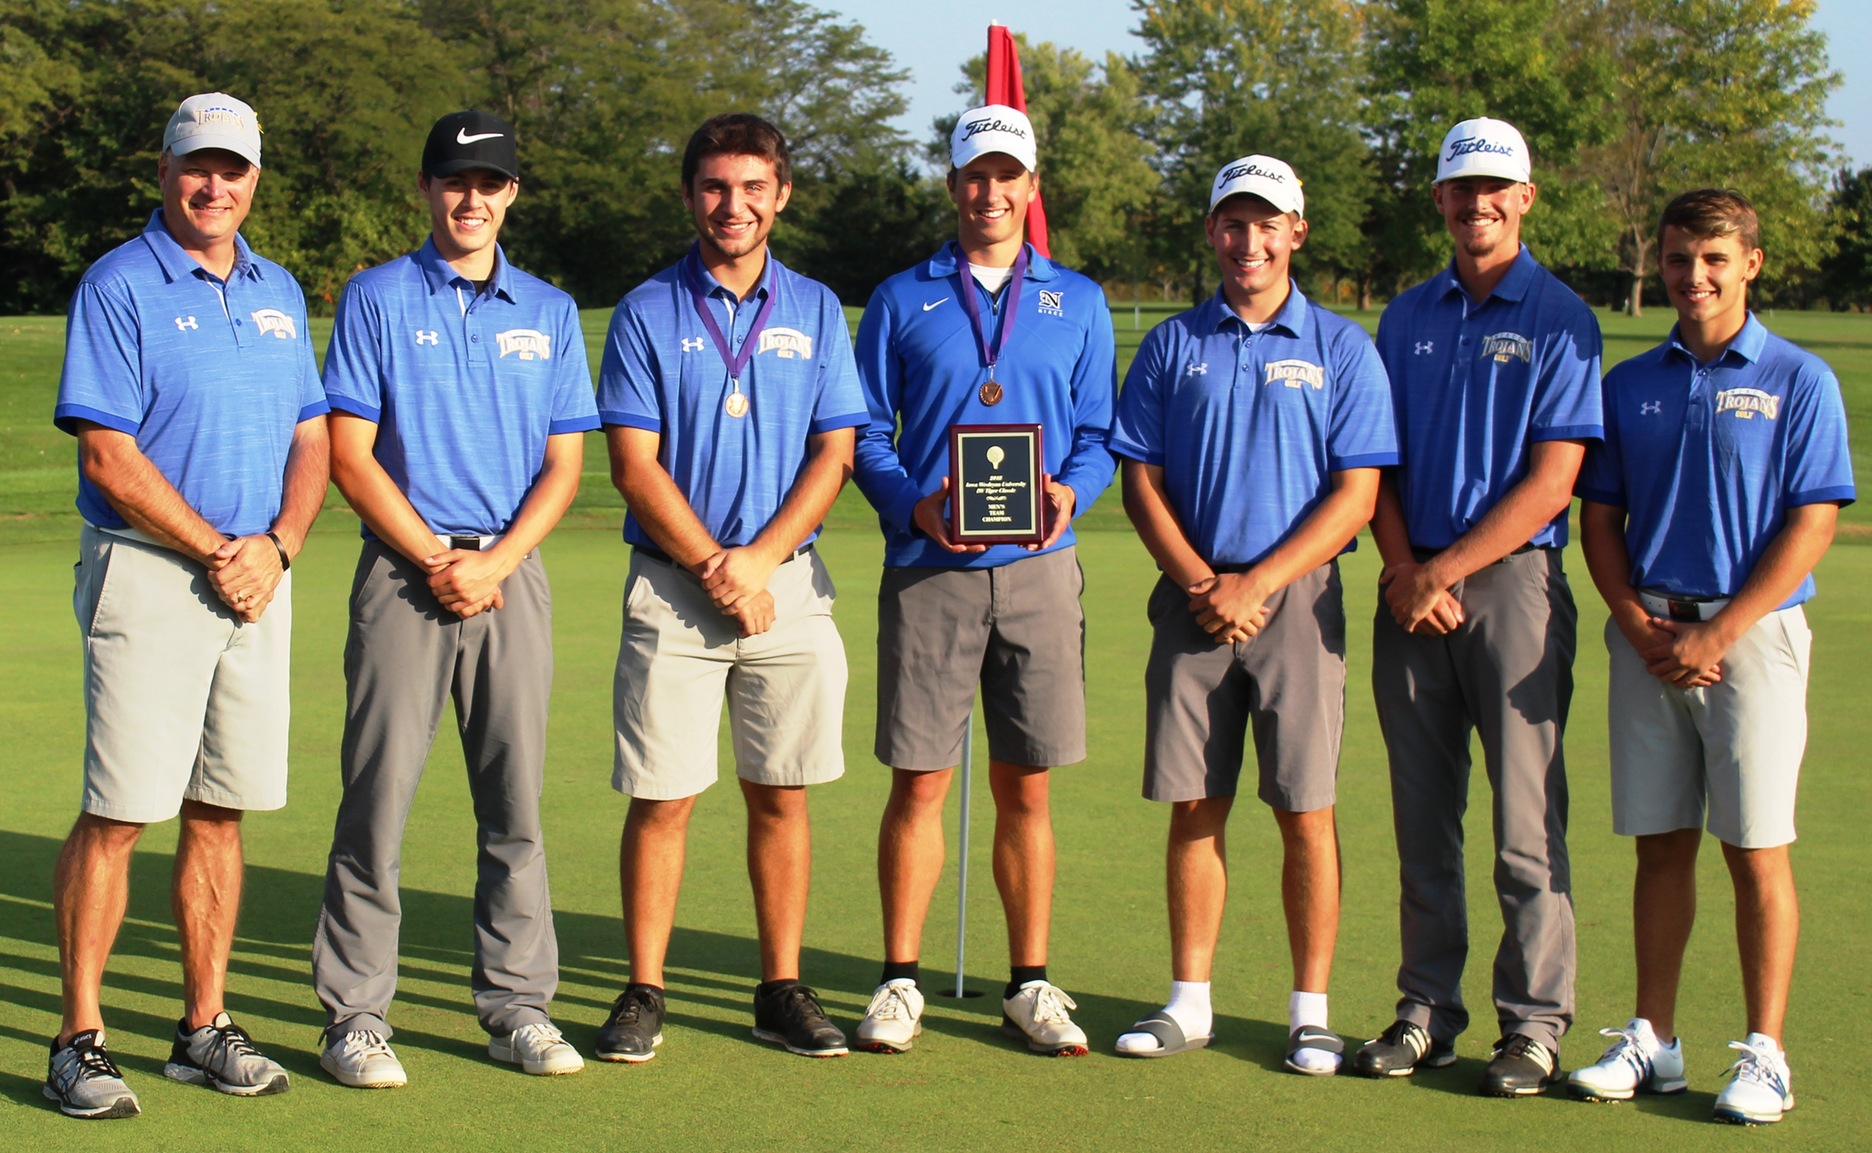 The NIACC men's golf team with its winning plaque at the Iowa Wesleyan Tiger Classic.